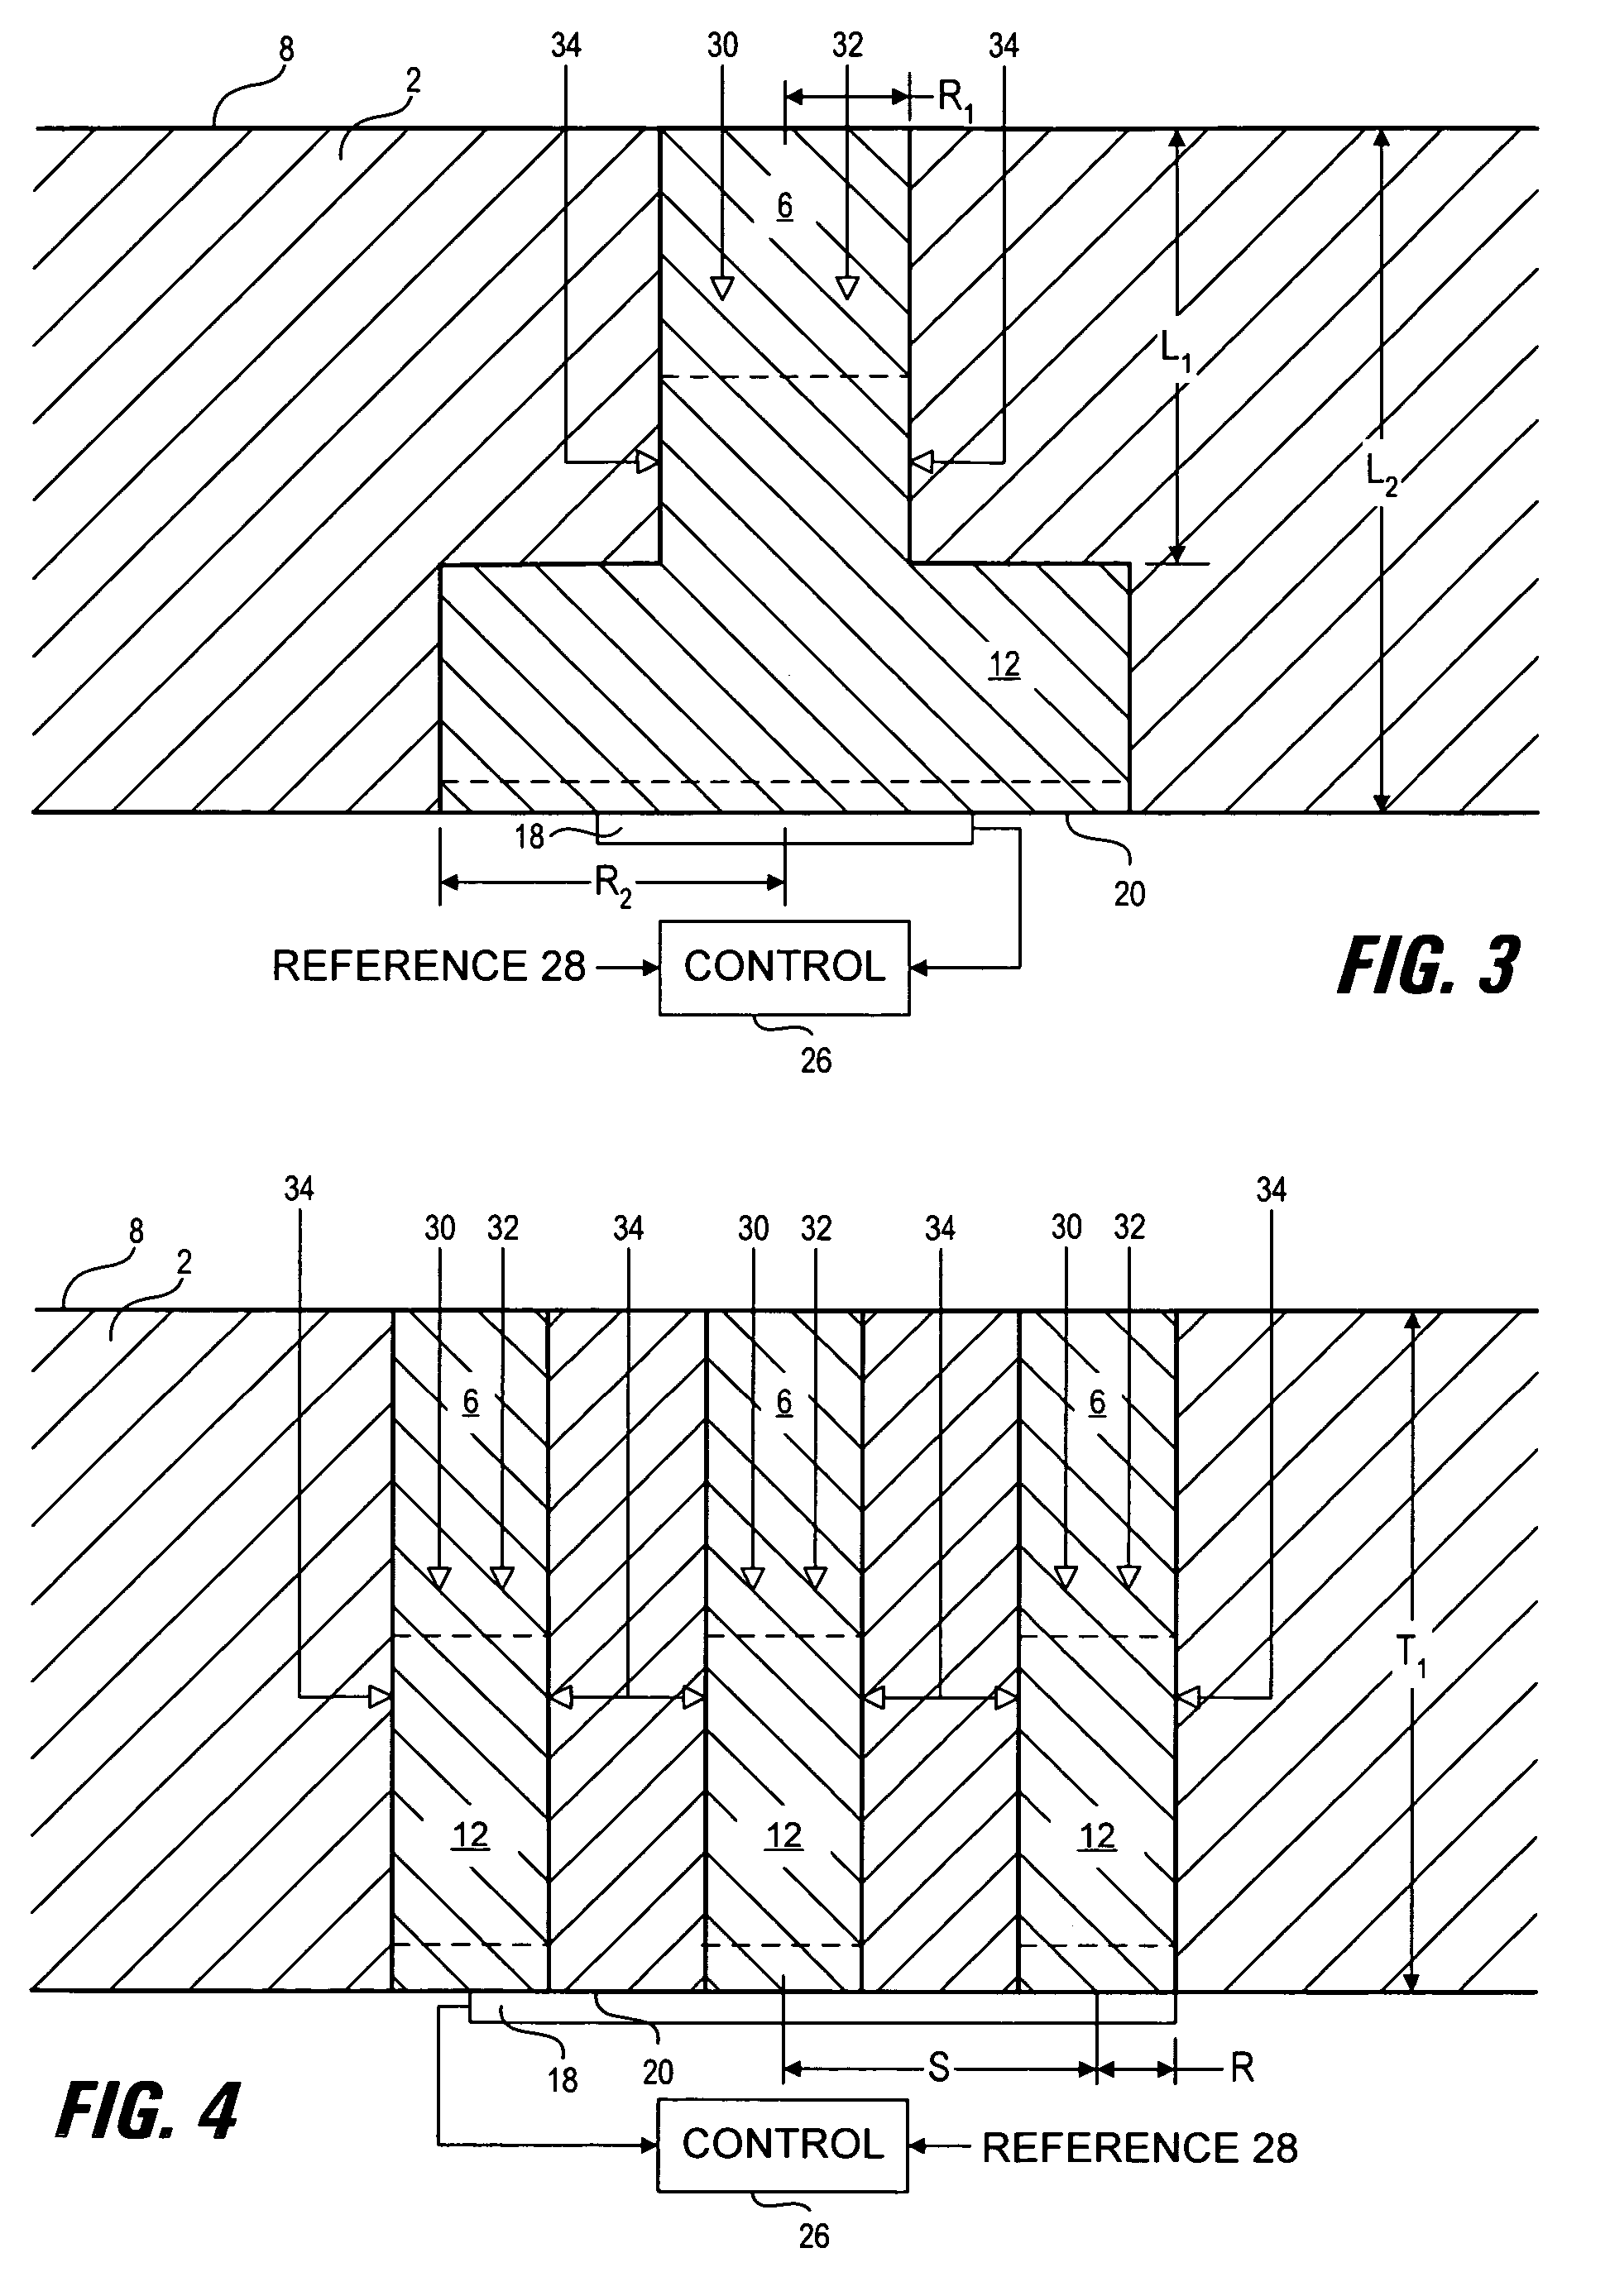 Membrane and electrode structure for implantable sensor